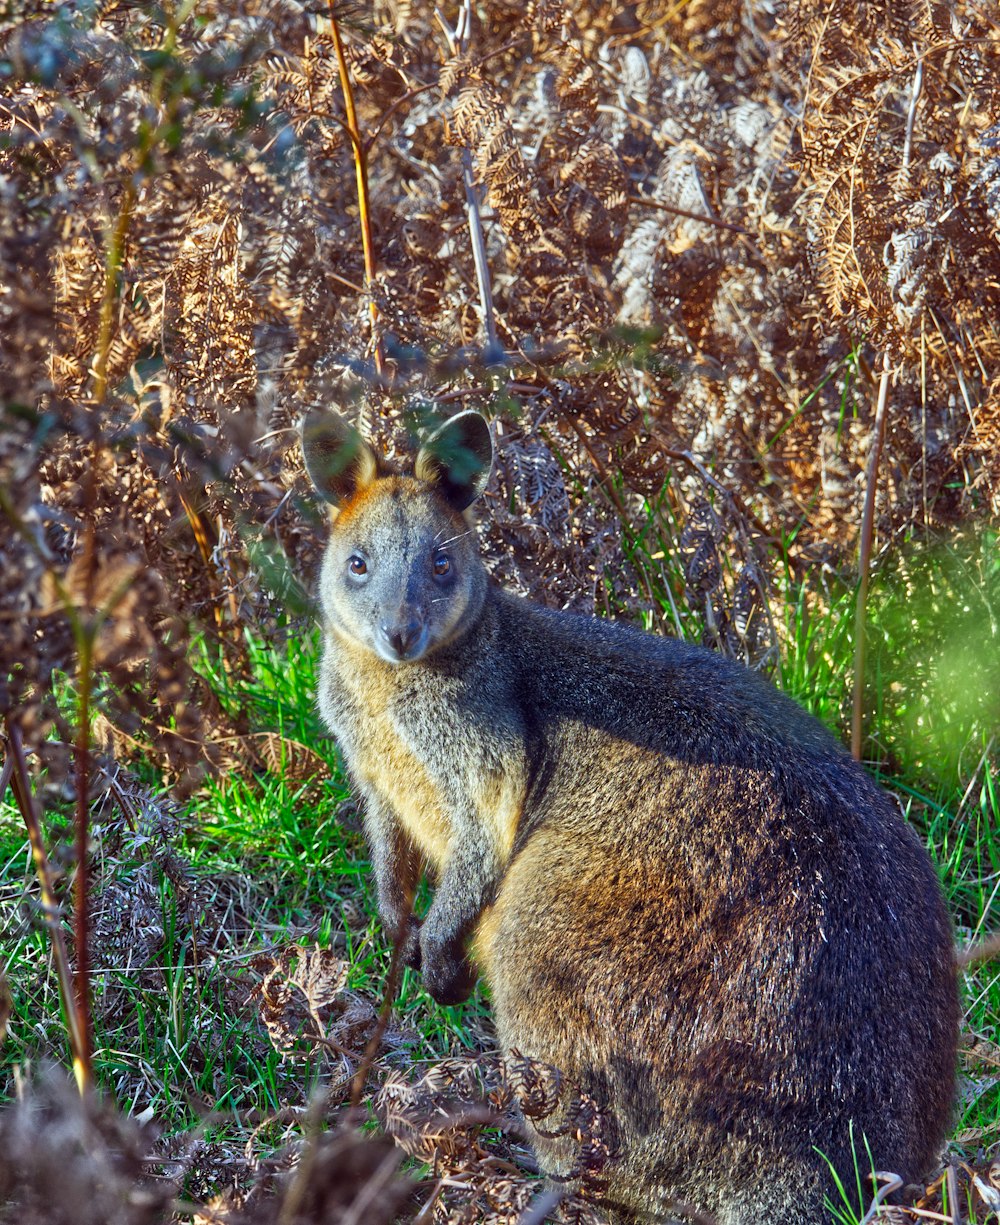 a close up of a kangaroo in a field of grass